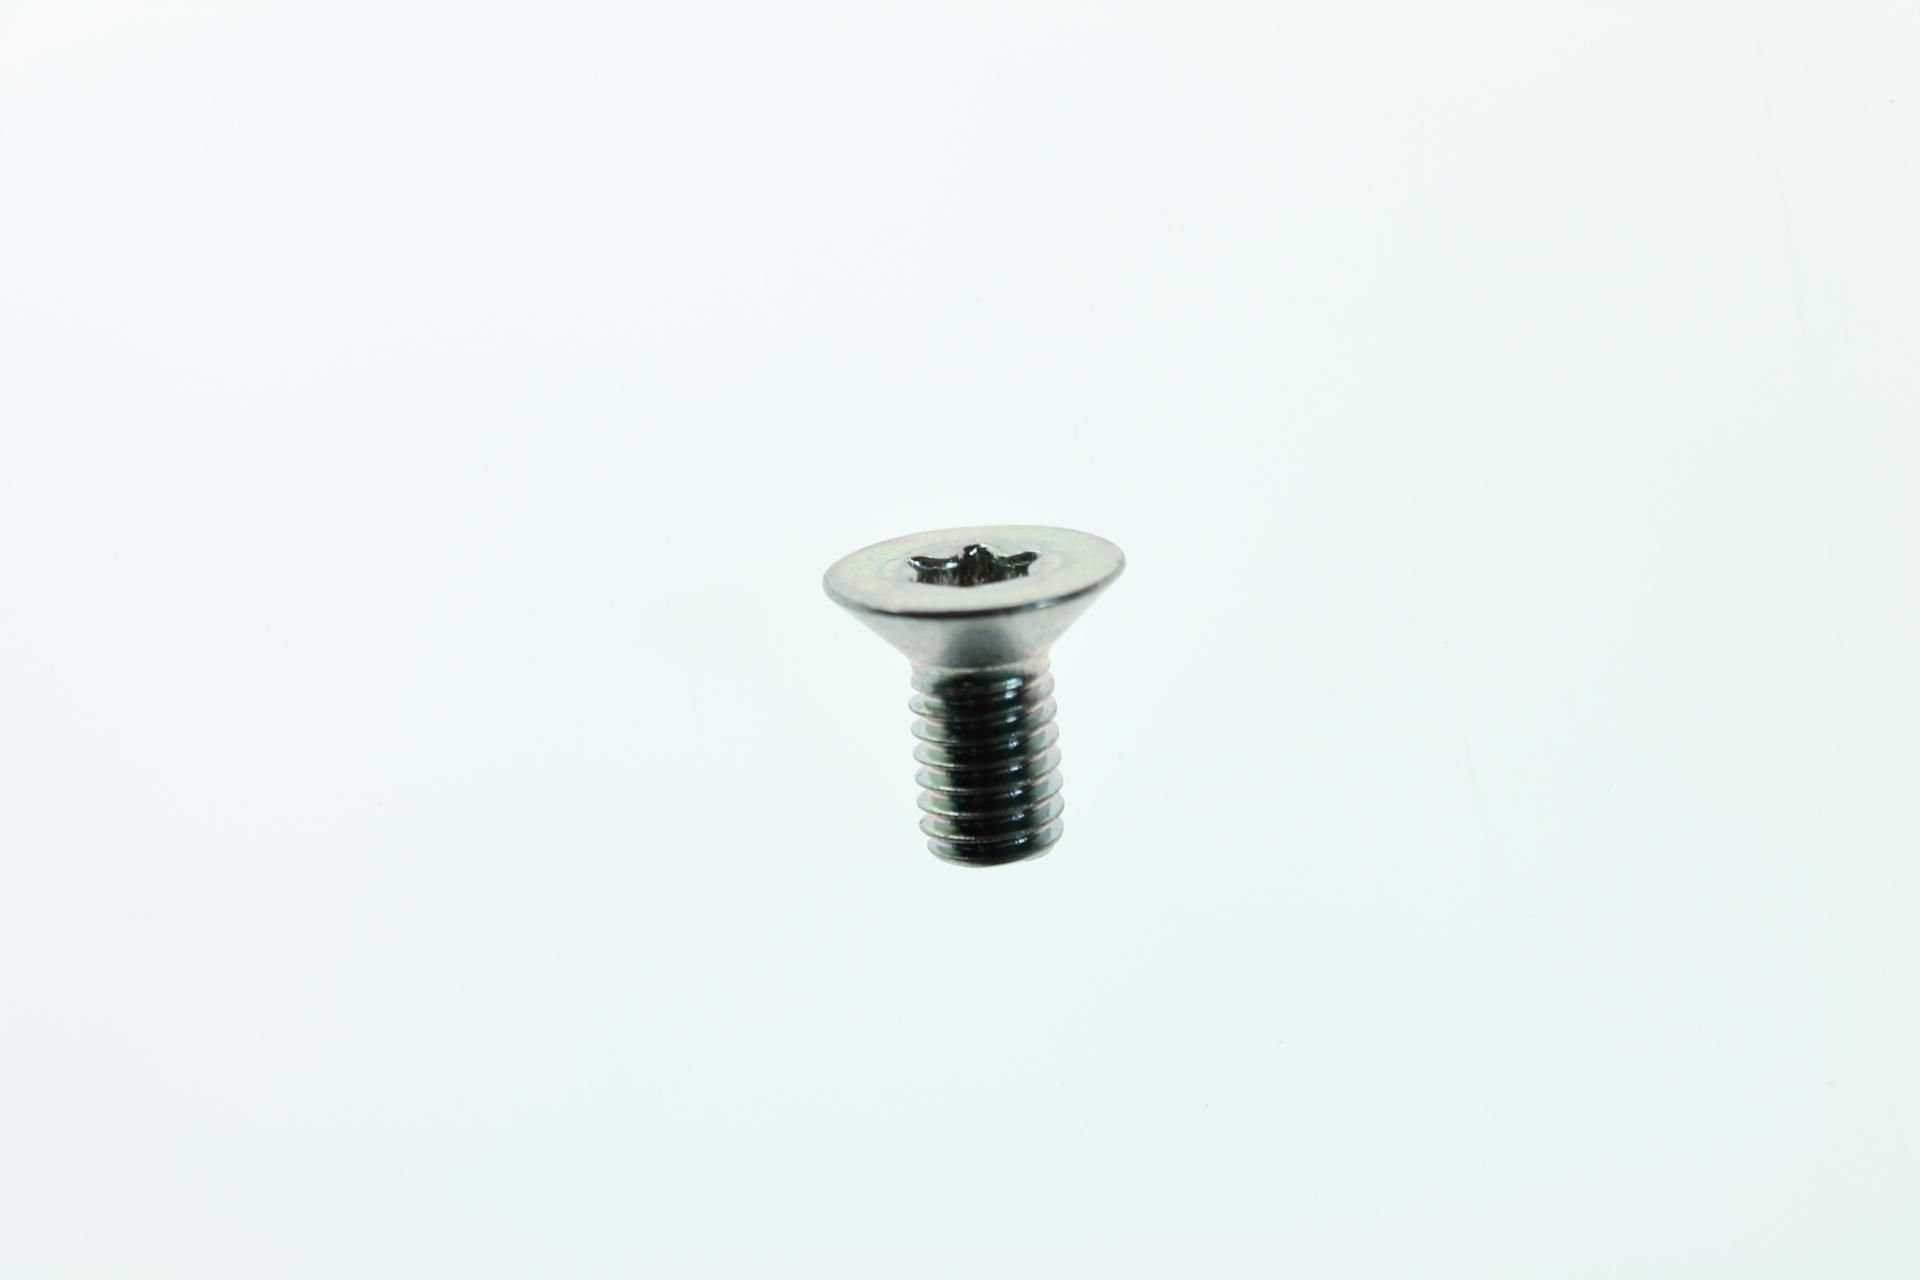 90151-06053-00 Superseded by 90151-06052-00 - SCREW, COUNTERSUNK